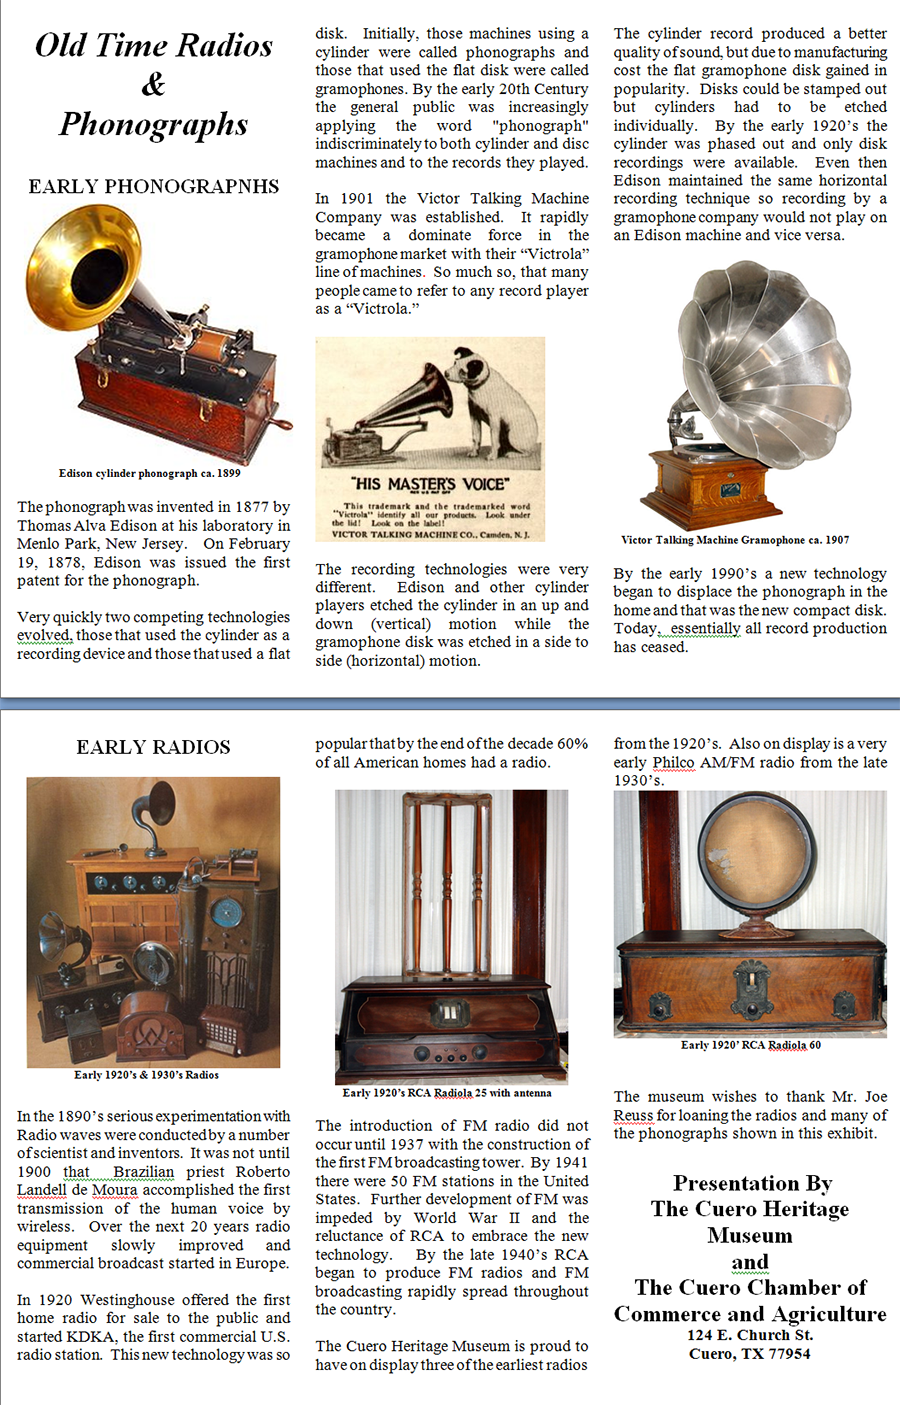 old time radios and phonographs permanent exhibit